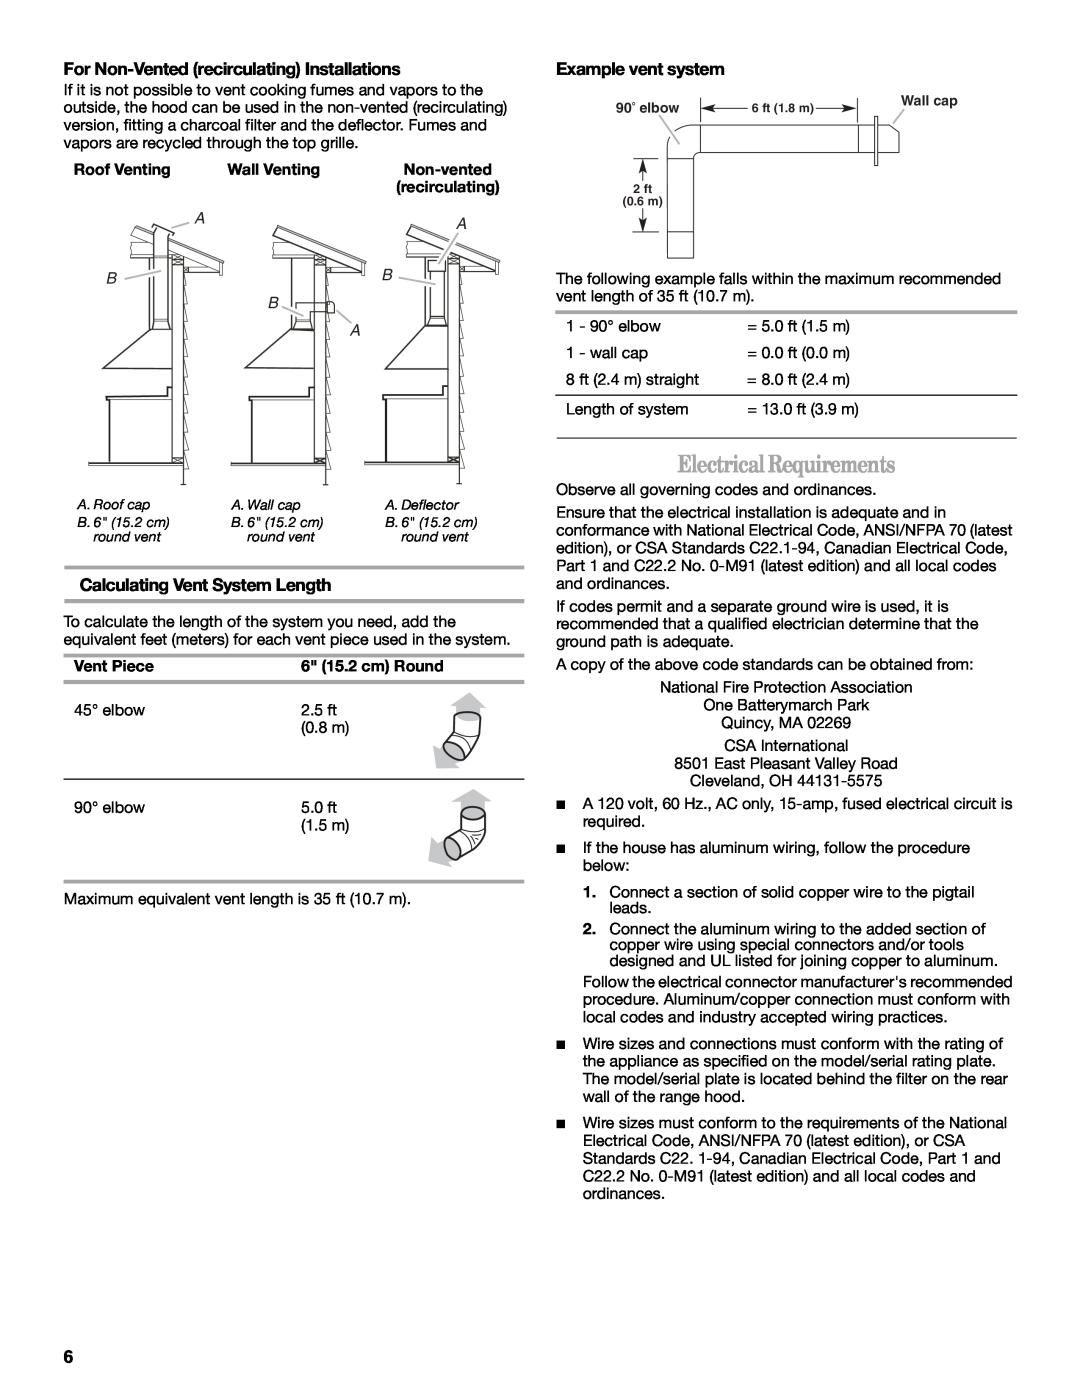 Whirlpool GXW7336DXS Electrical Requirements, For Non-Vented recirculating Installations, Example vent system, Non-vented 